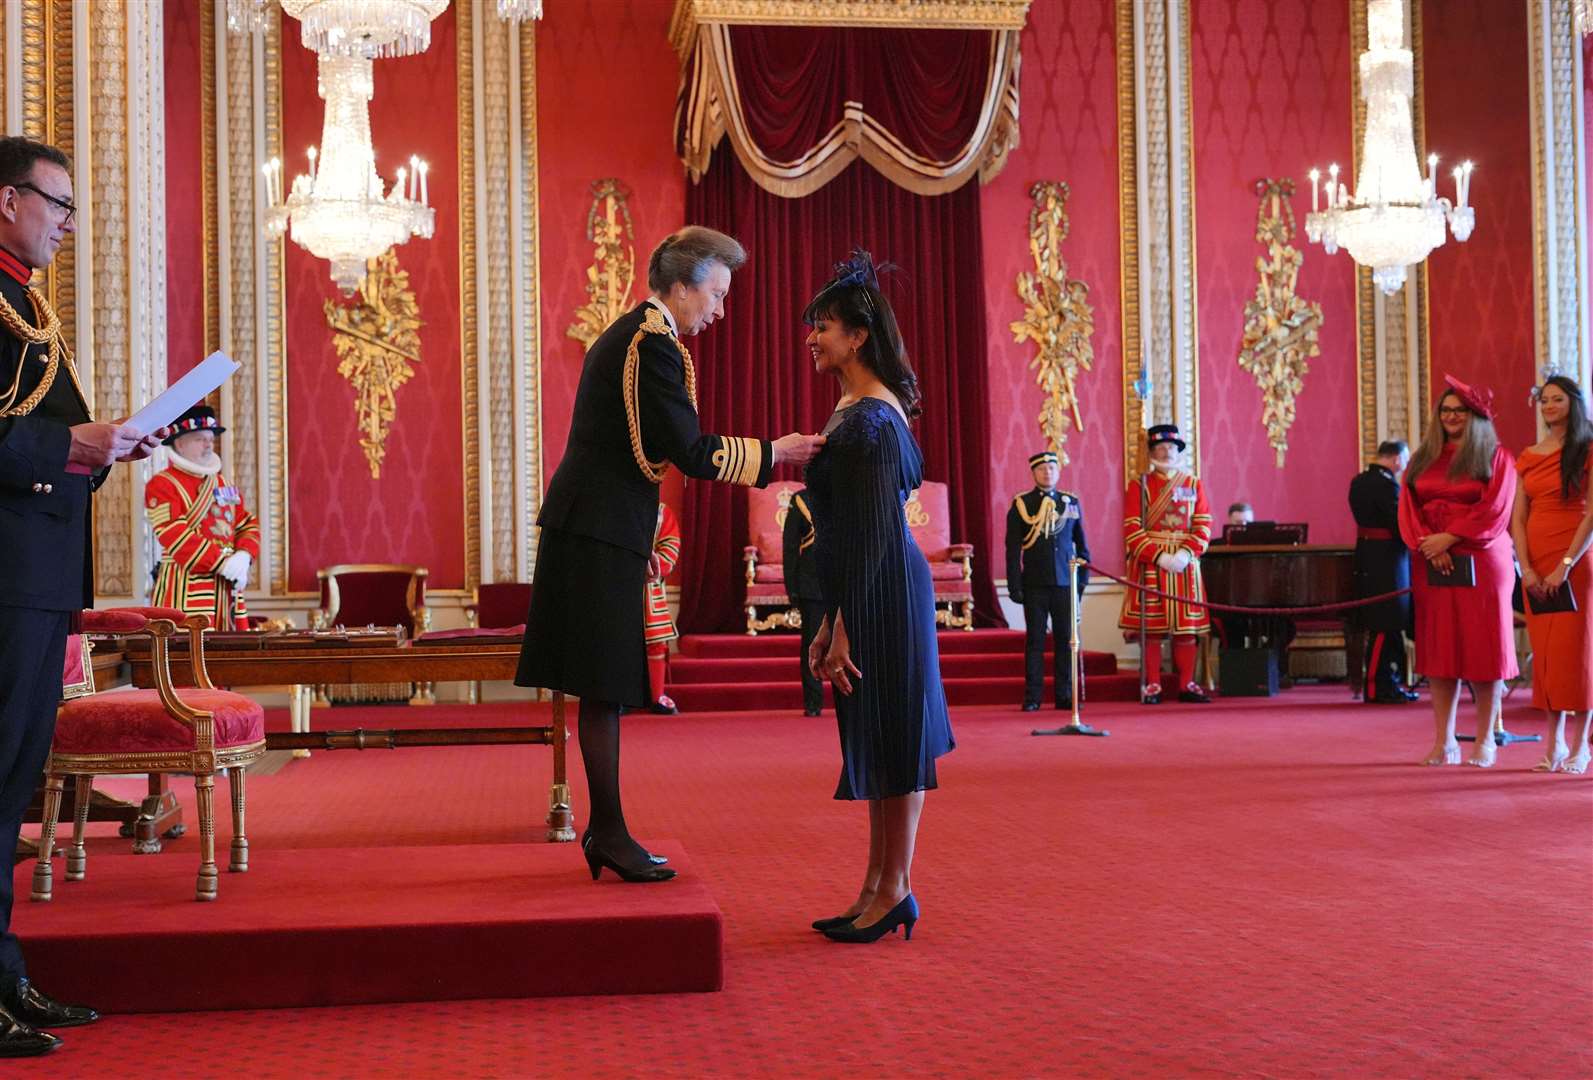 Ms Felix said the MBE meant “so much” to her and wanted to be able to “give back everything” she has learned over the years (Jonathan Brady/PA)